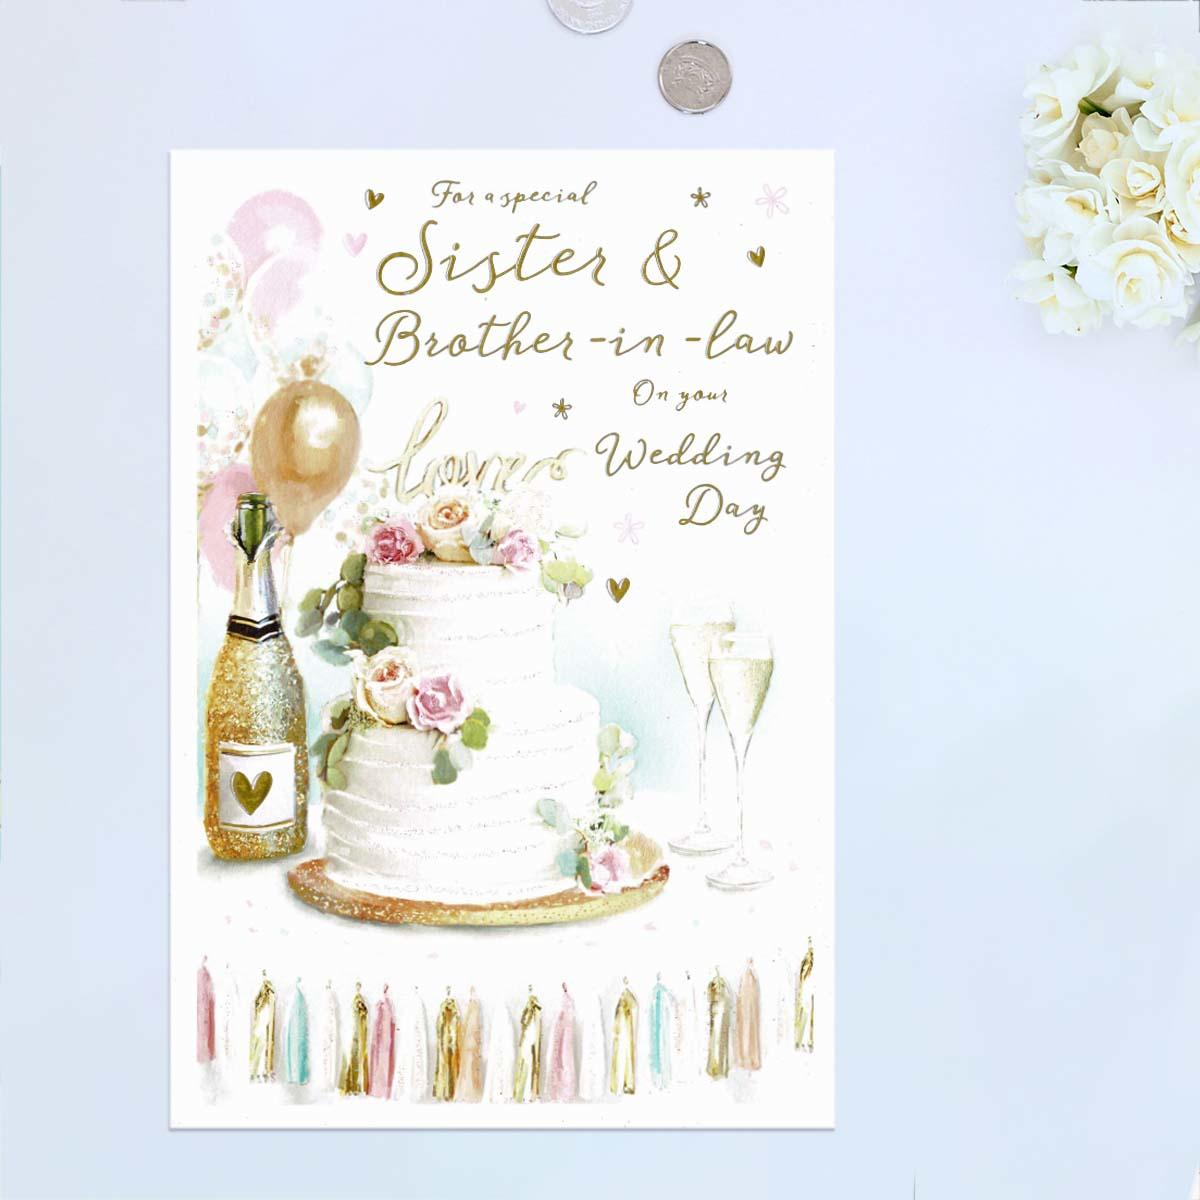 Special Sister And Brother In Law Wedding Day Card Front Image